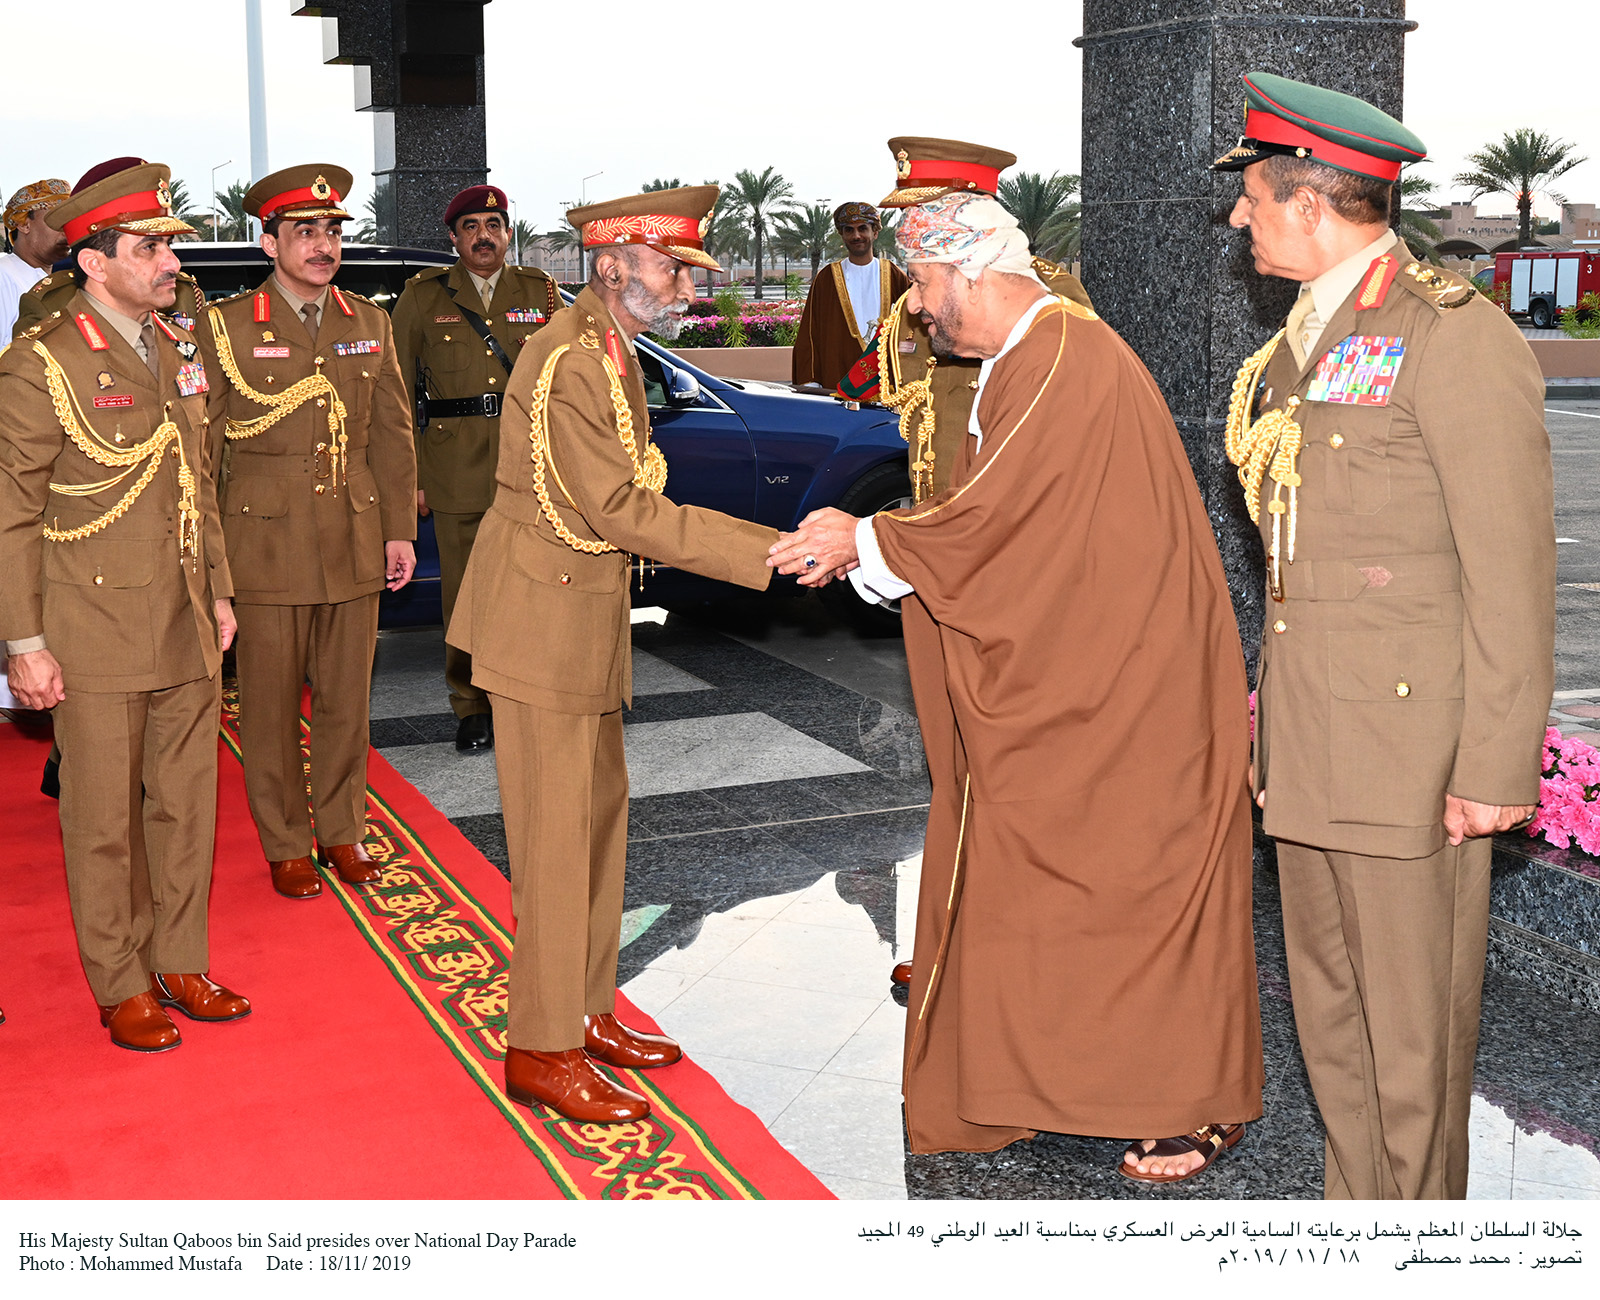 In pictures: His Majesty presides over Oman's National Day parade